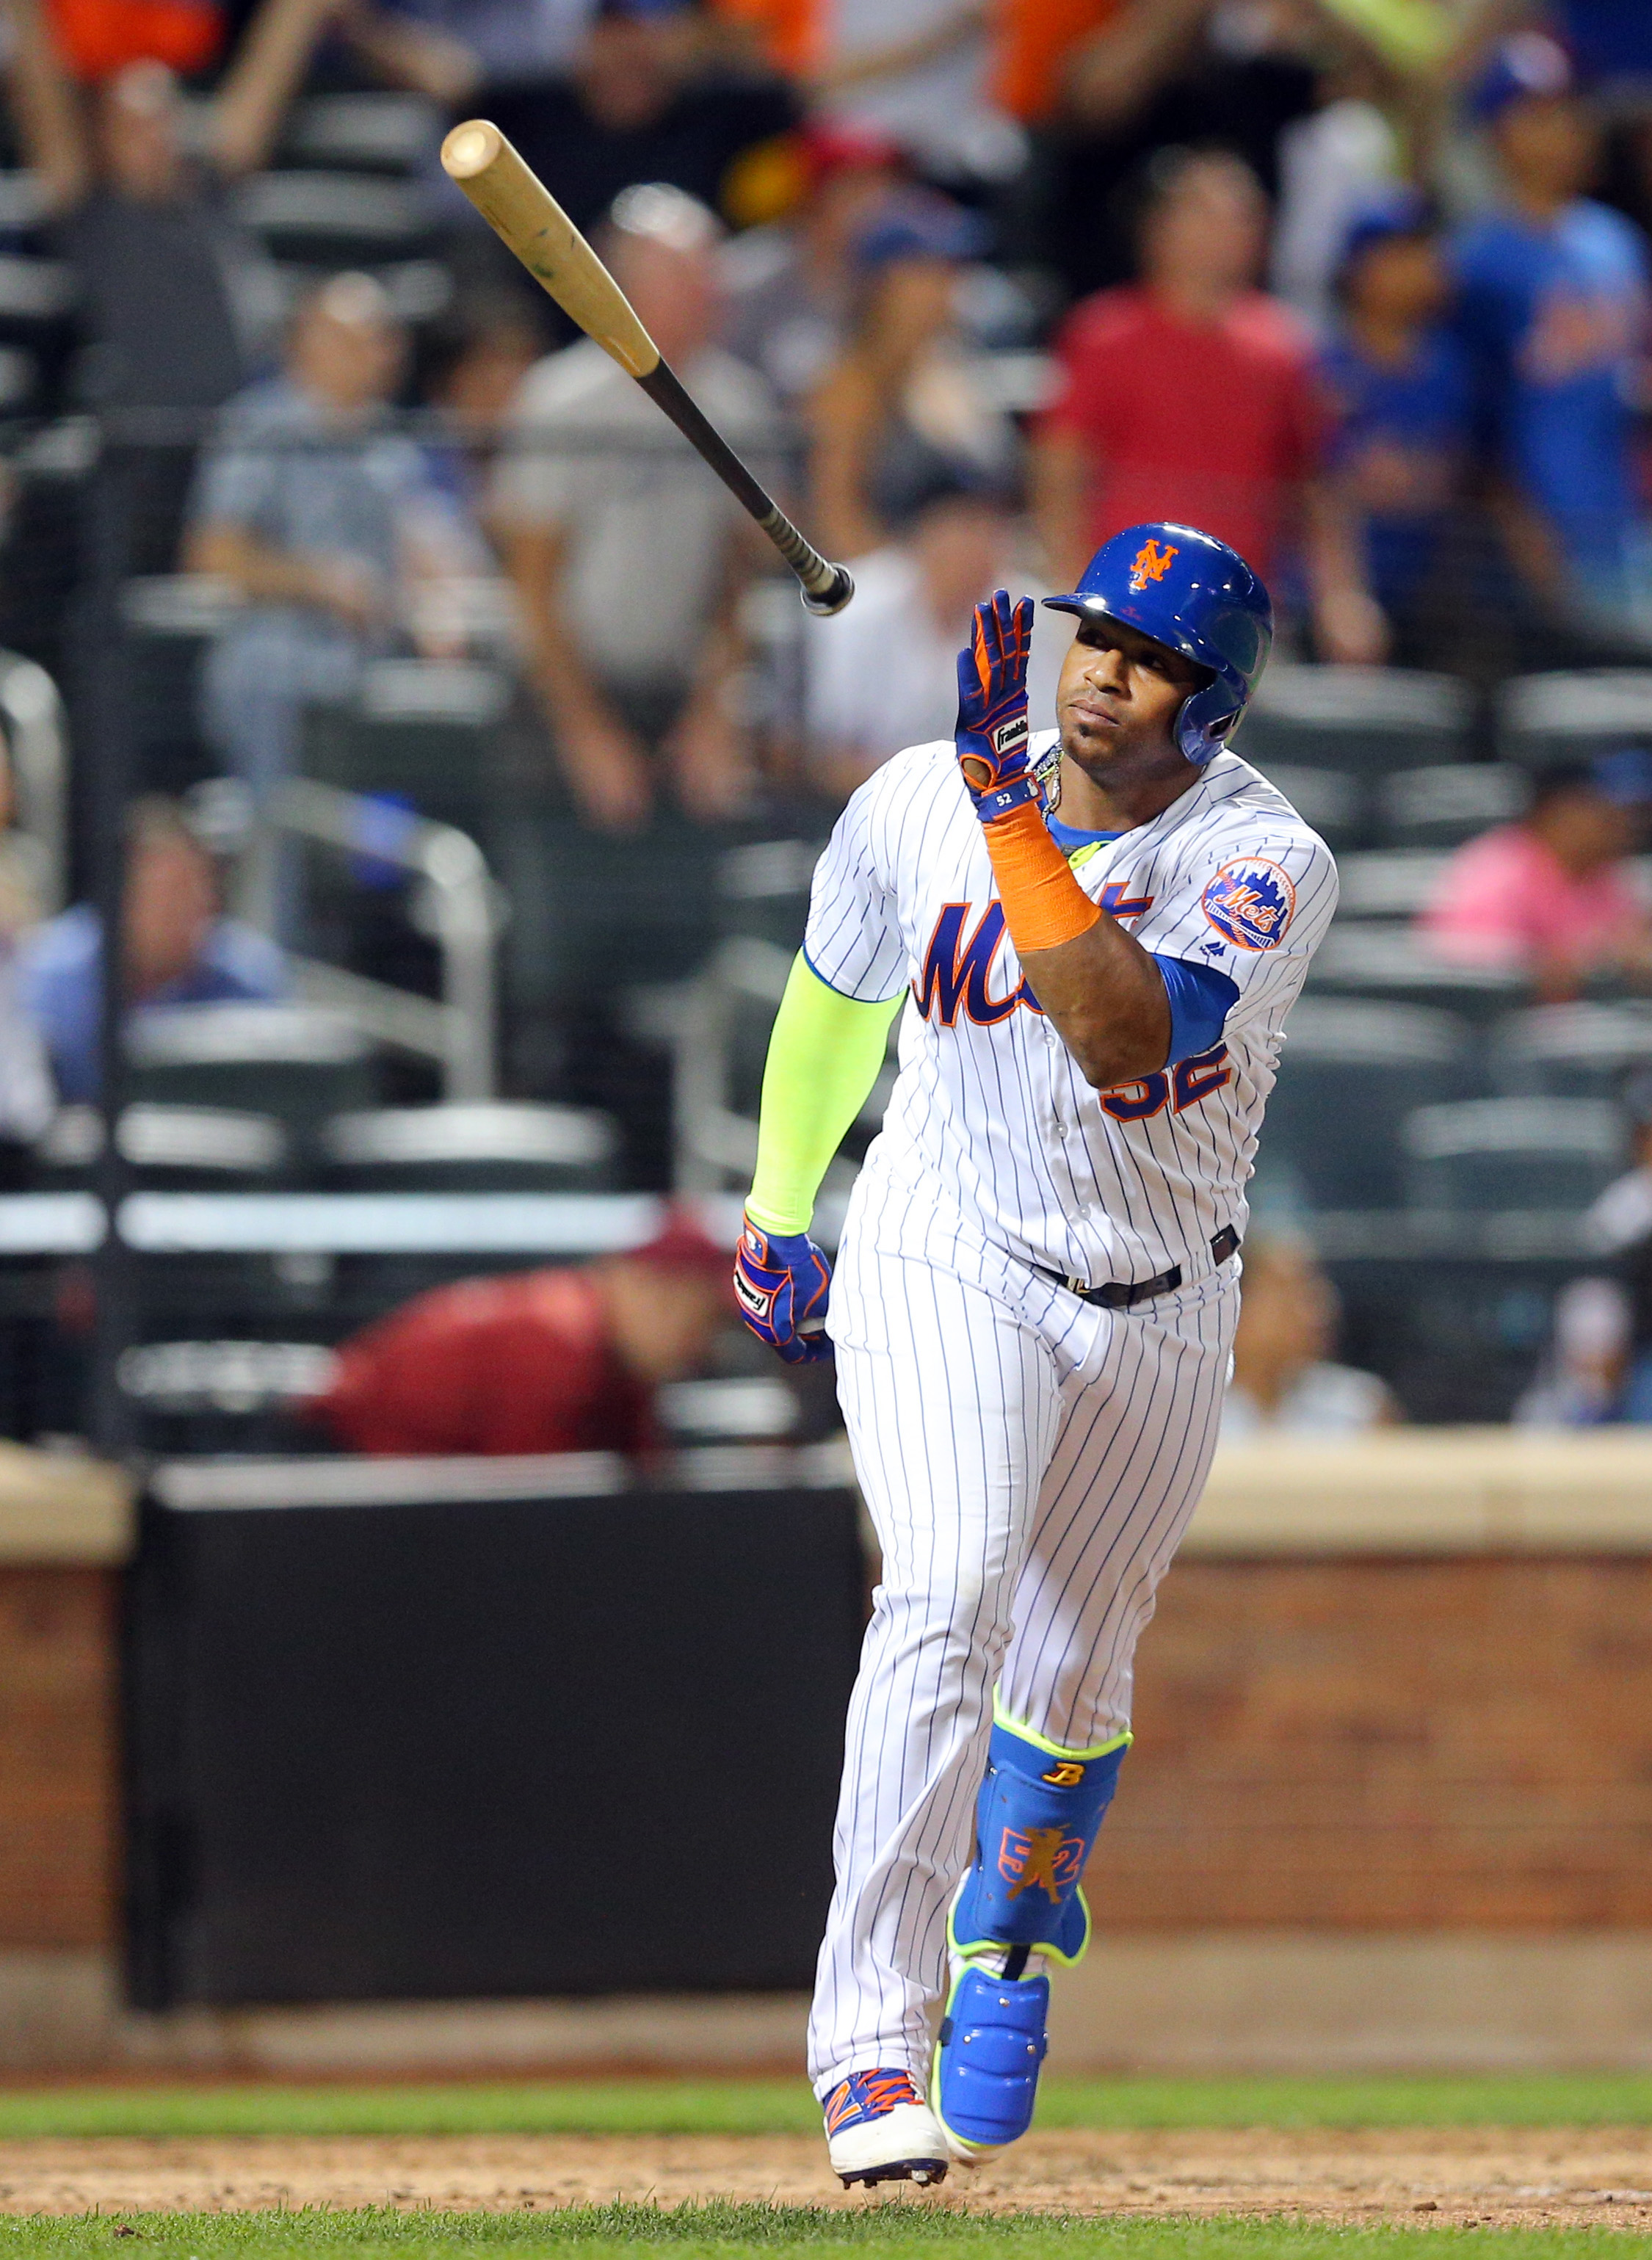 Curtis Granderson emerges as candidate for Mets' manager opening